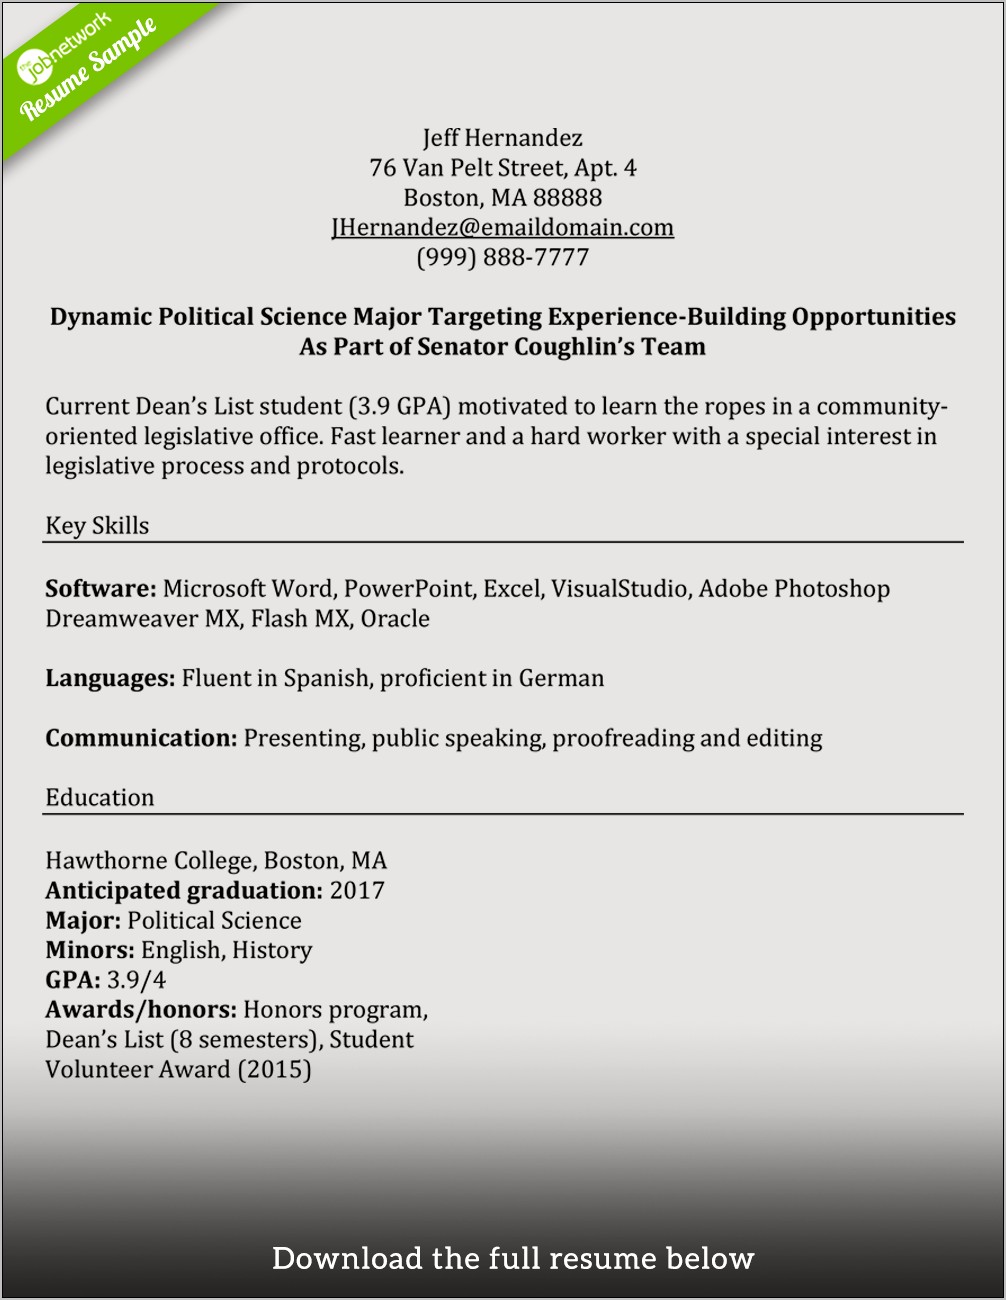 Sample Of Nested Resume For Grad Student Intership